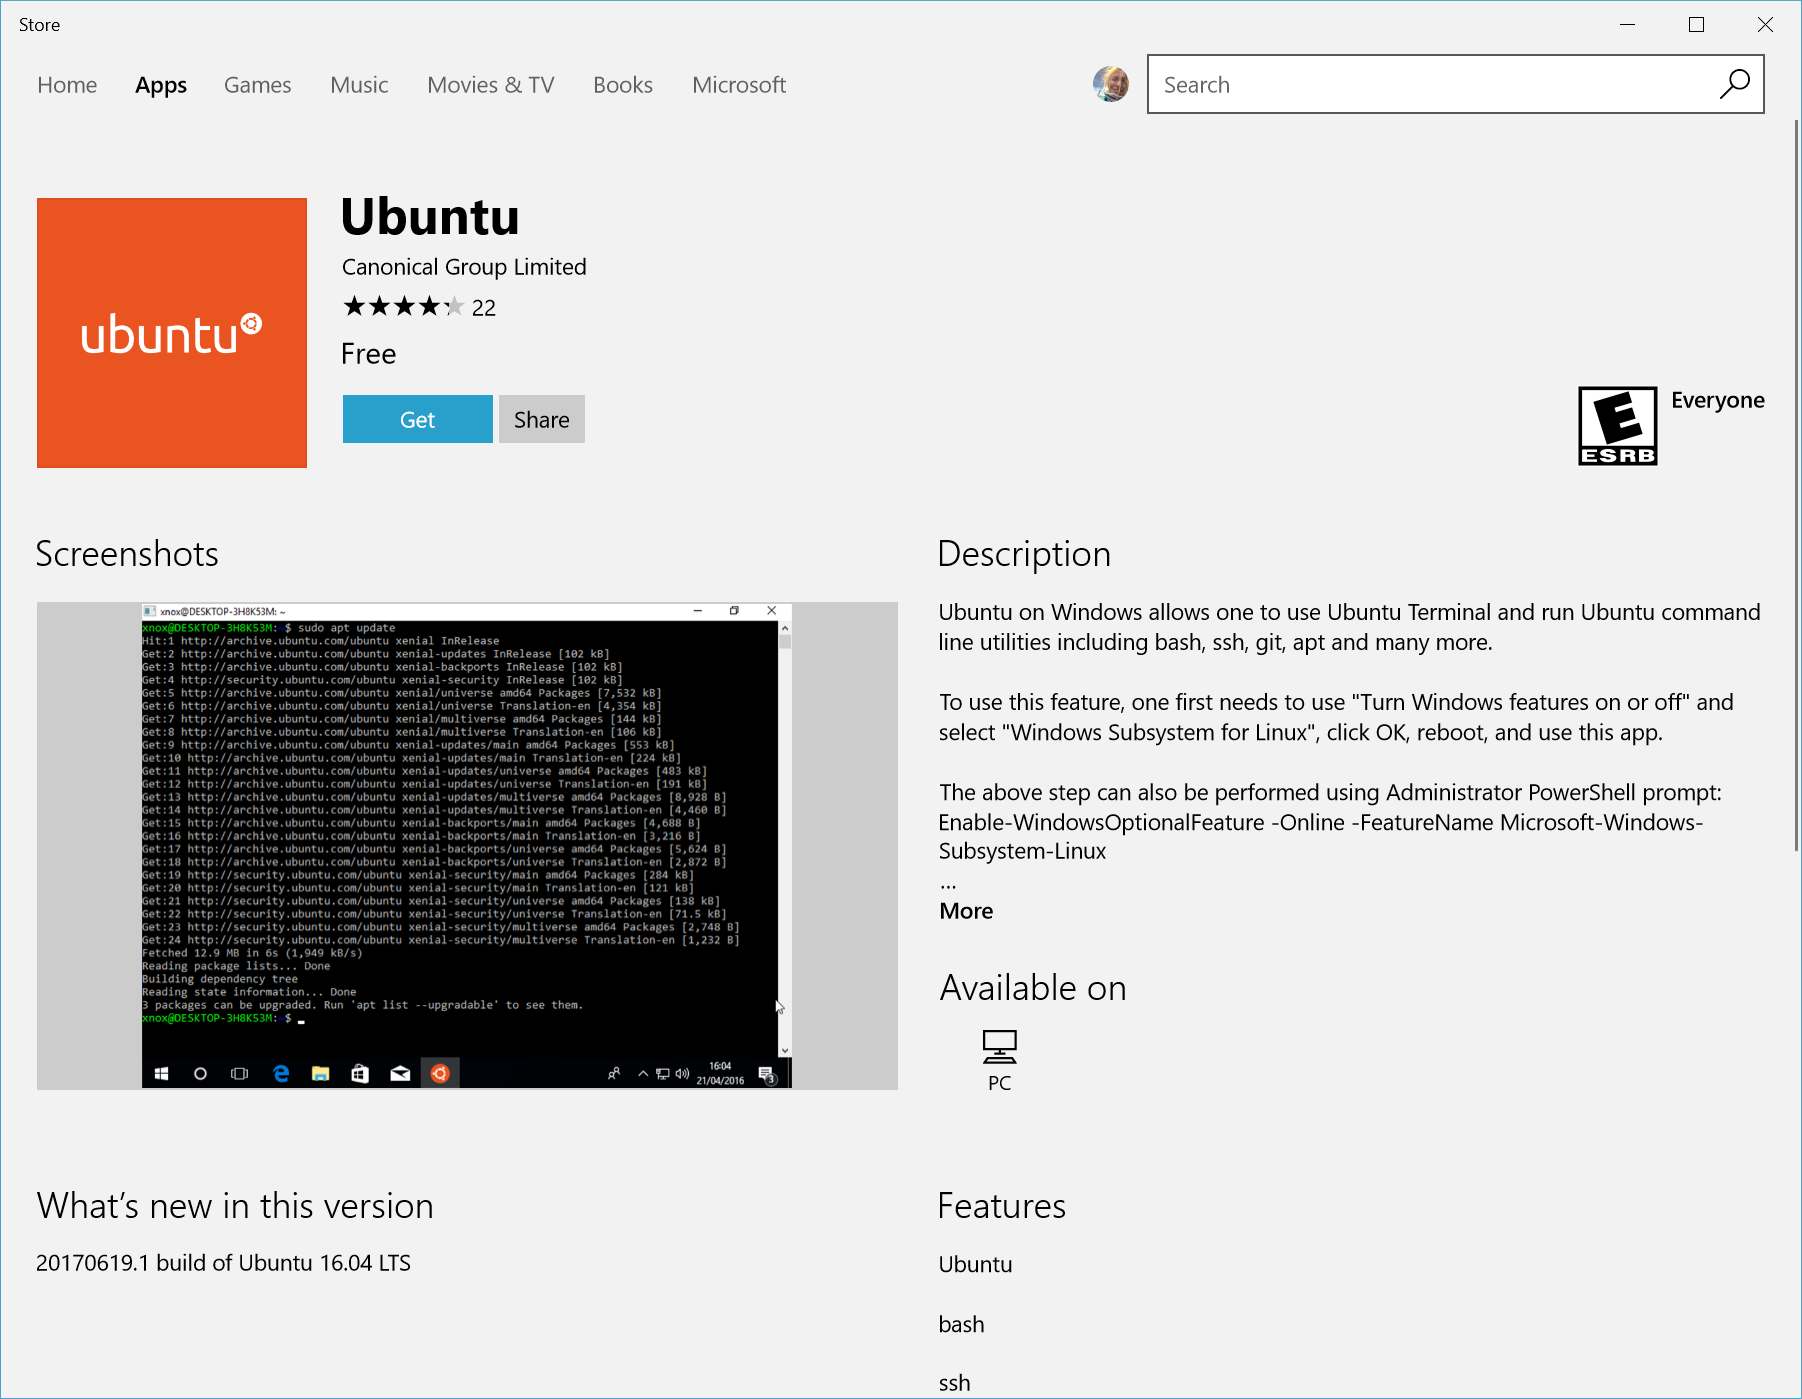 View of Linux distros in the Microsoft store